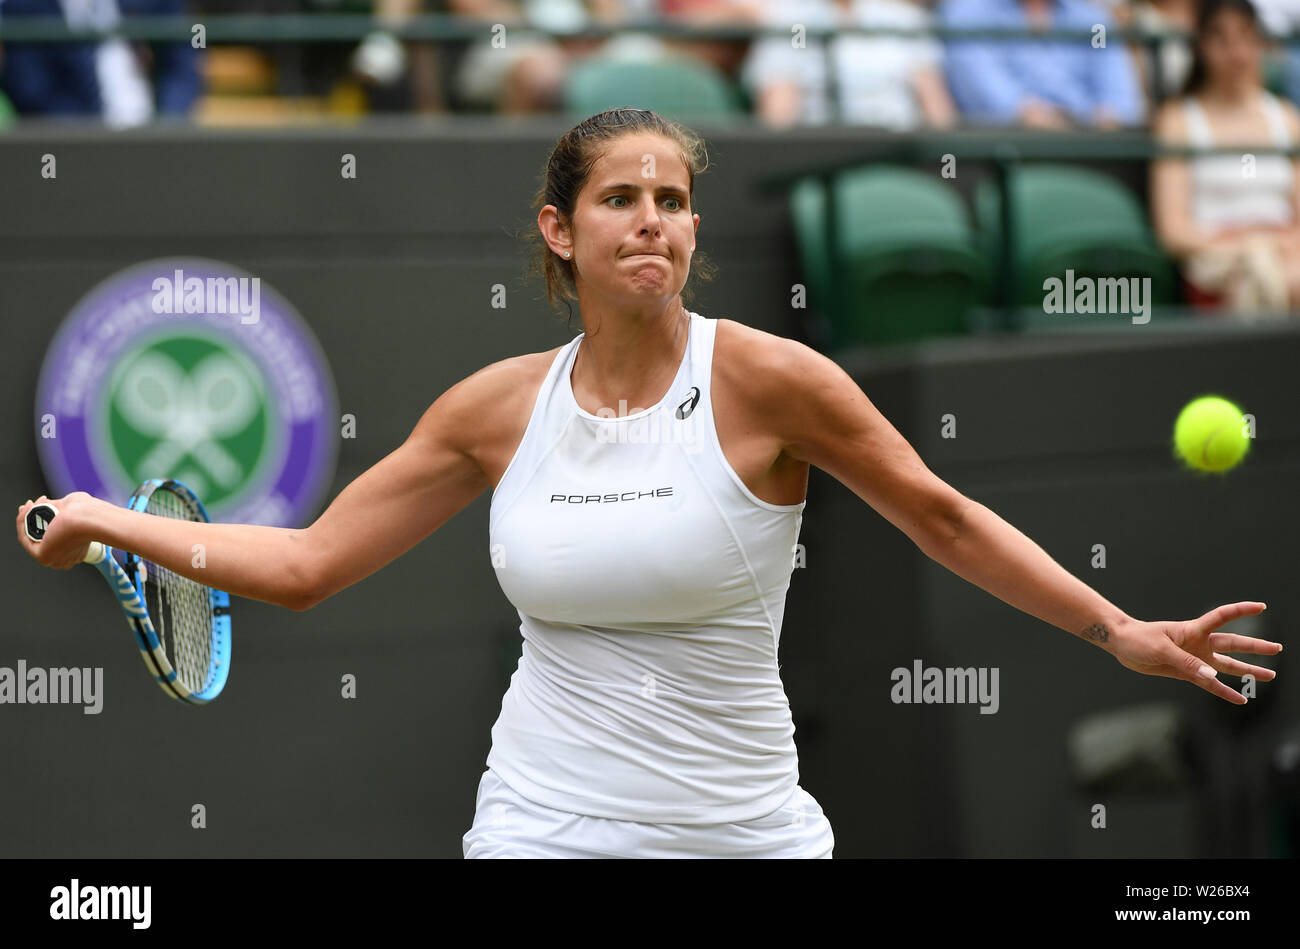 London, Britain. 6th July, 2019. Julia Goerges competes during the women's  singles third round match between Serena Williams of the United States and Julia  Goerges of Germany at the 2019 Wimbledon Tennis